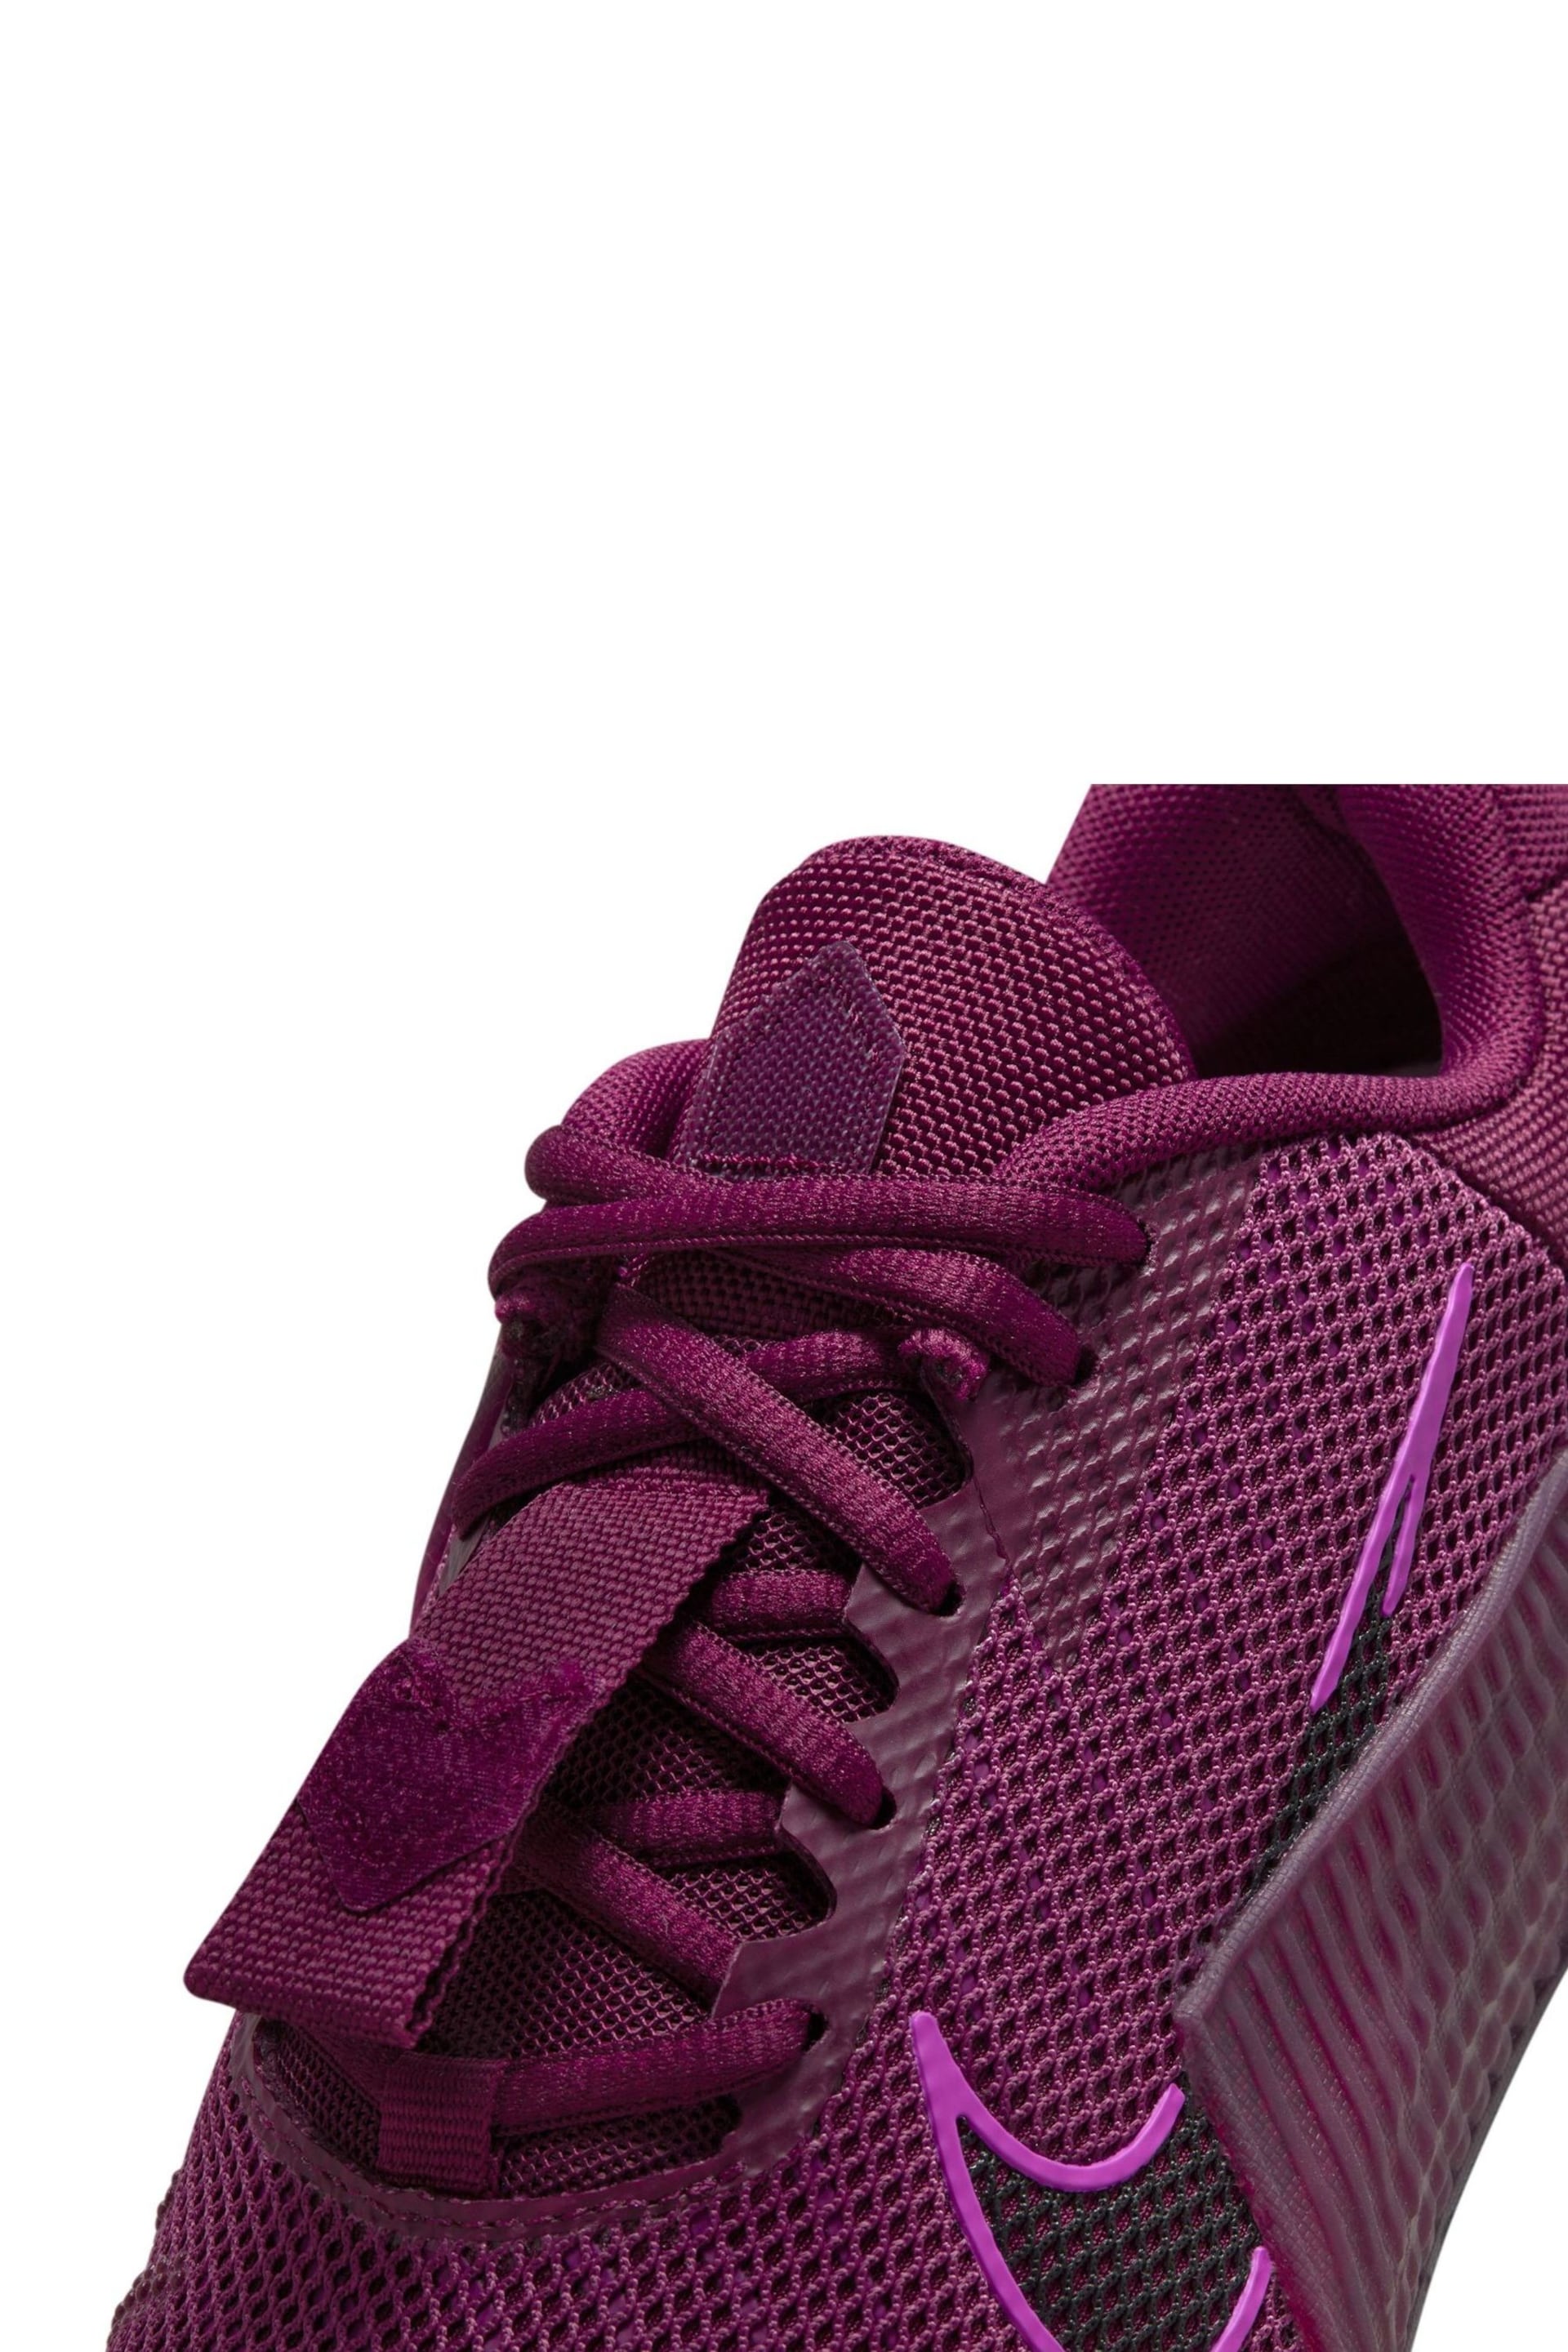 Nike Burgundy Red Metcon 9 Training Trainers - Image 10 of 13